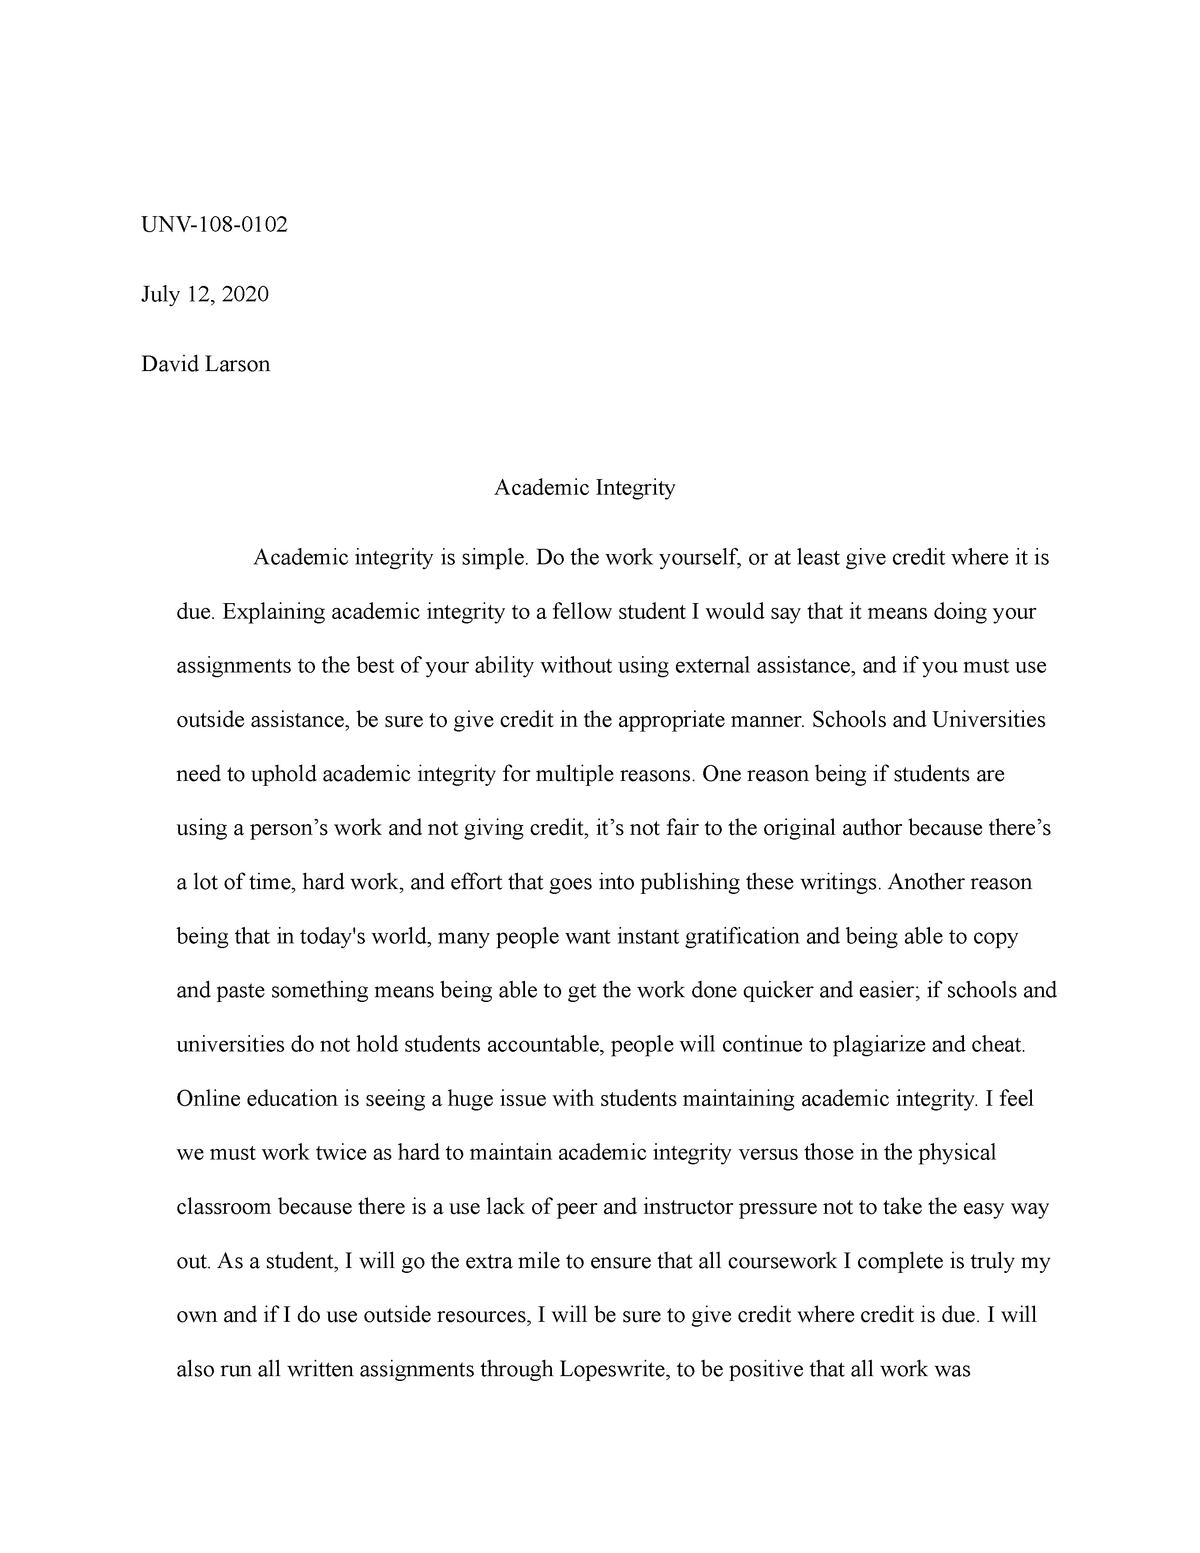 essay on national integrity